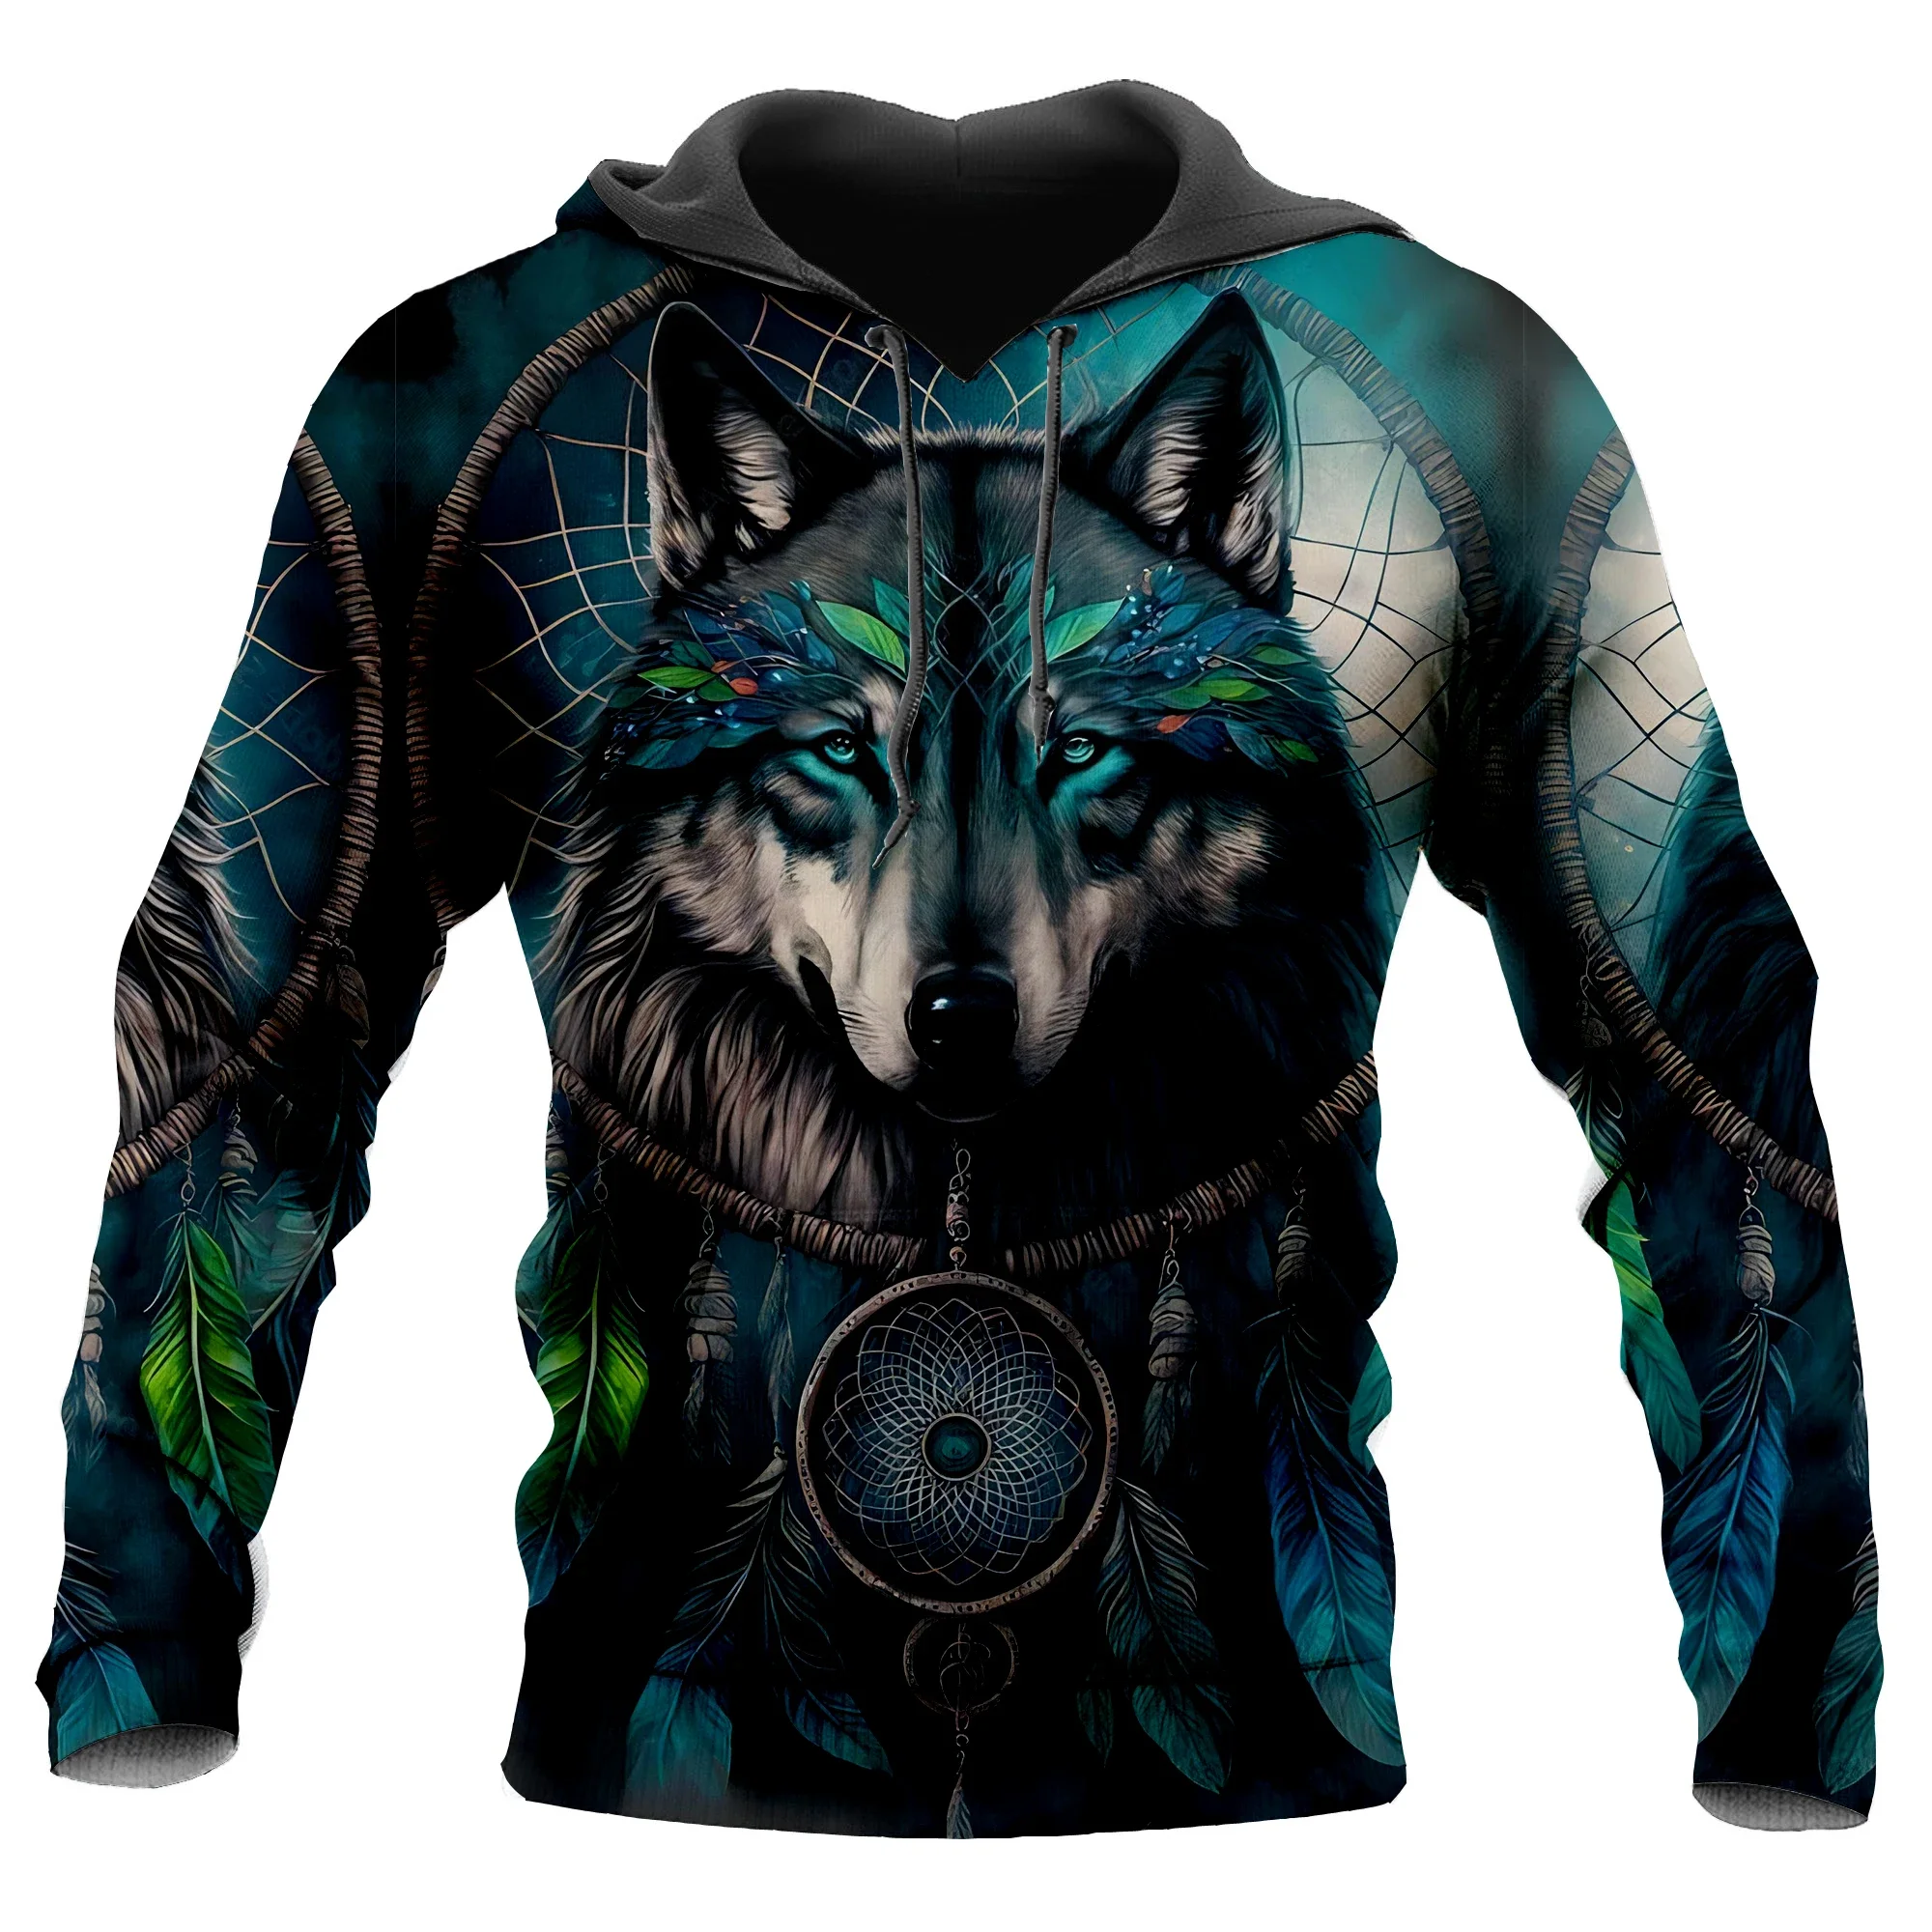 

Native Wolf Dream Catcher - Two Wolves 3D Print Hoodie Man Female Pullover Sweatshirt Hooded Jacket Jersey Coat Tracksuits-4